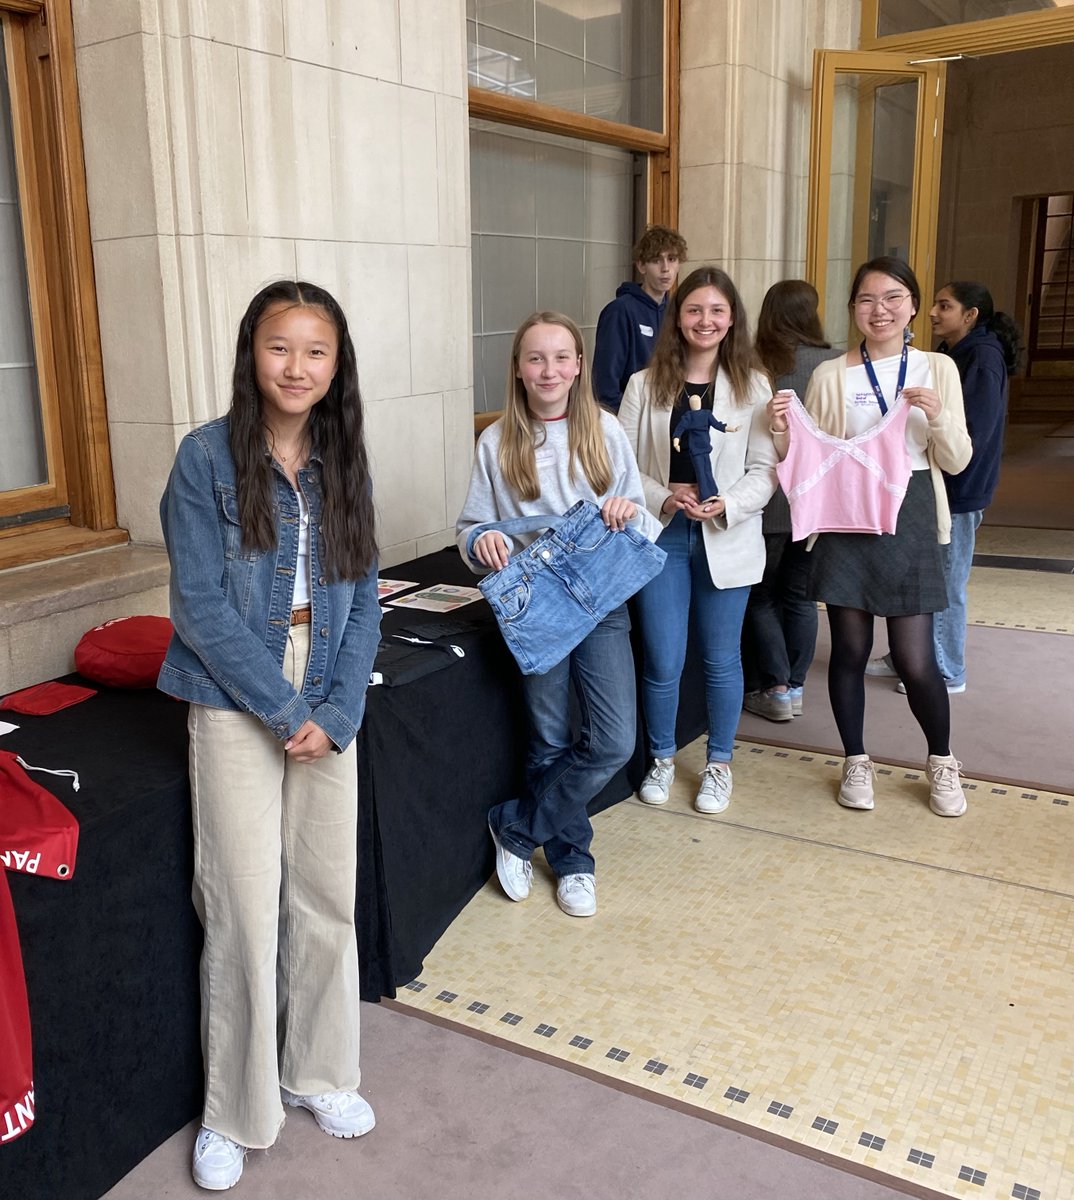 👖 Used jeans turned into trendy bags👜 👗 old cloth used for fashionable designs🥻 👕worn shirts upcycled into hand gloves 🧤 📷of the many creative solutions displayed by students from @BSB_Brussels school on how to #Beatpollution & stop fast fashion.♻️ #UNEPTextile #EU2024BE